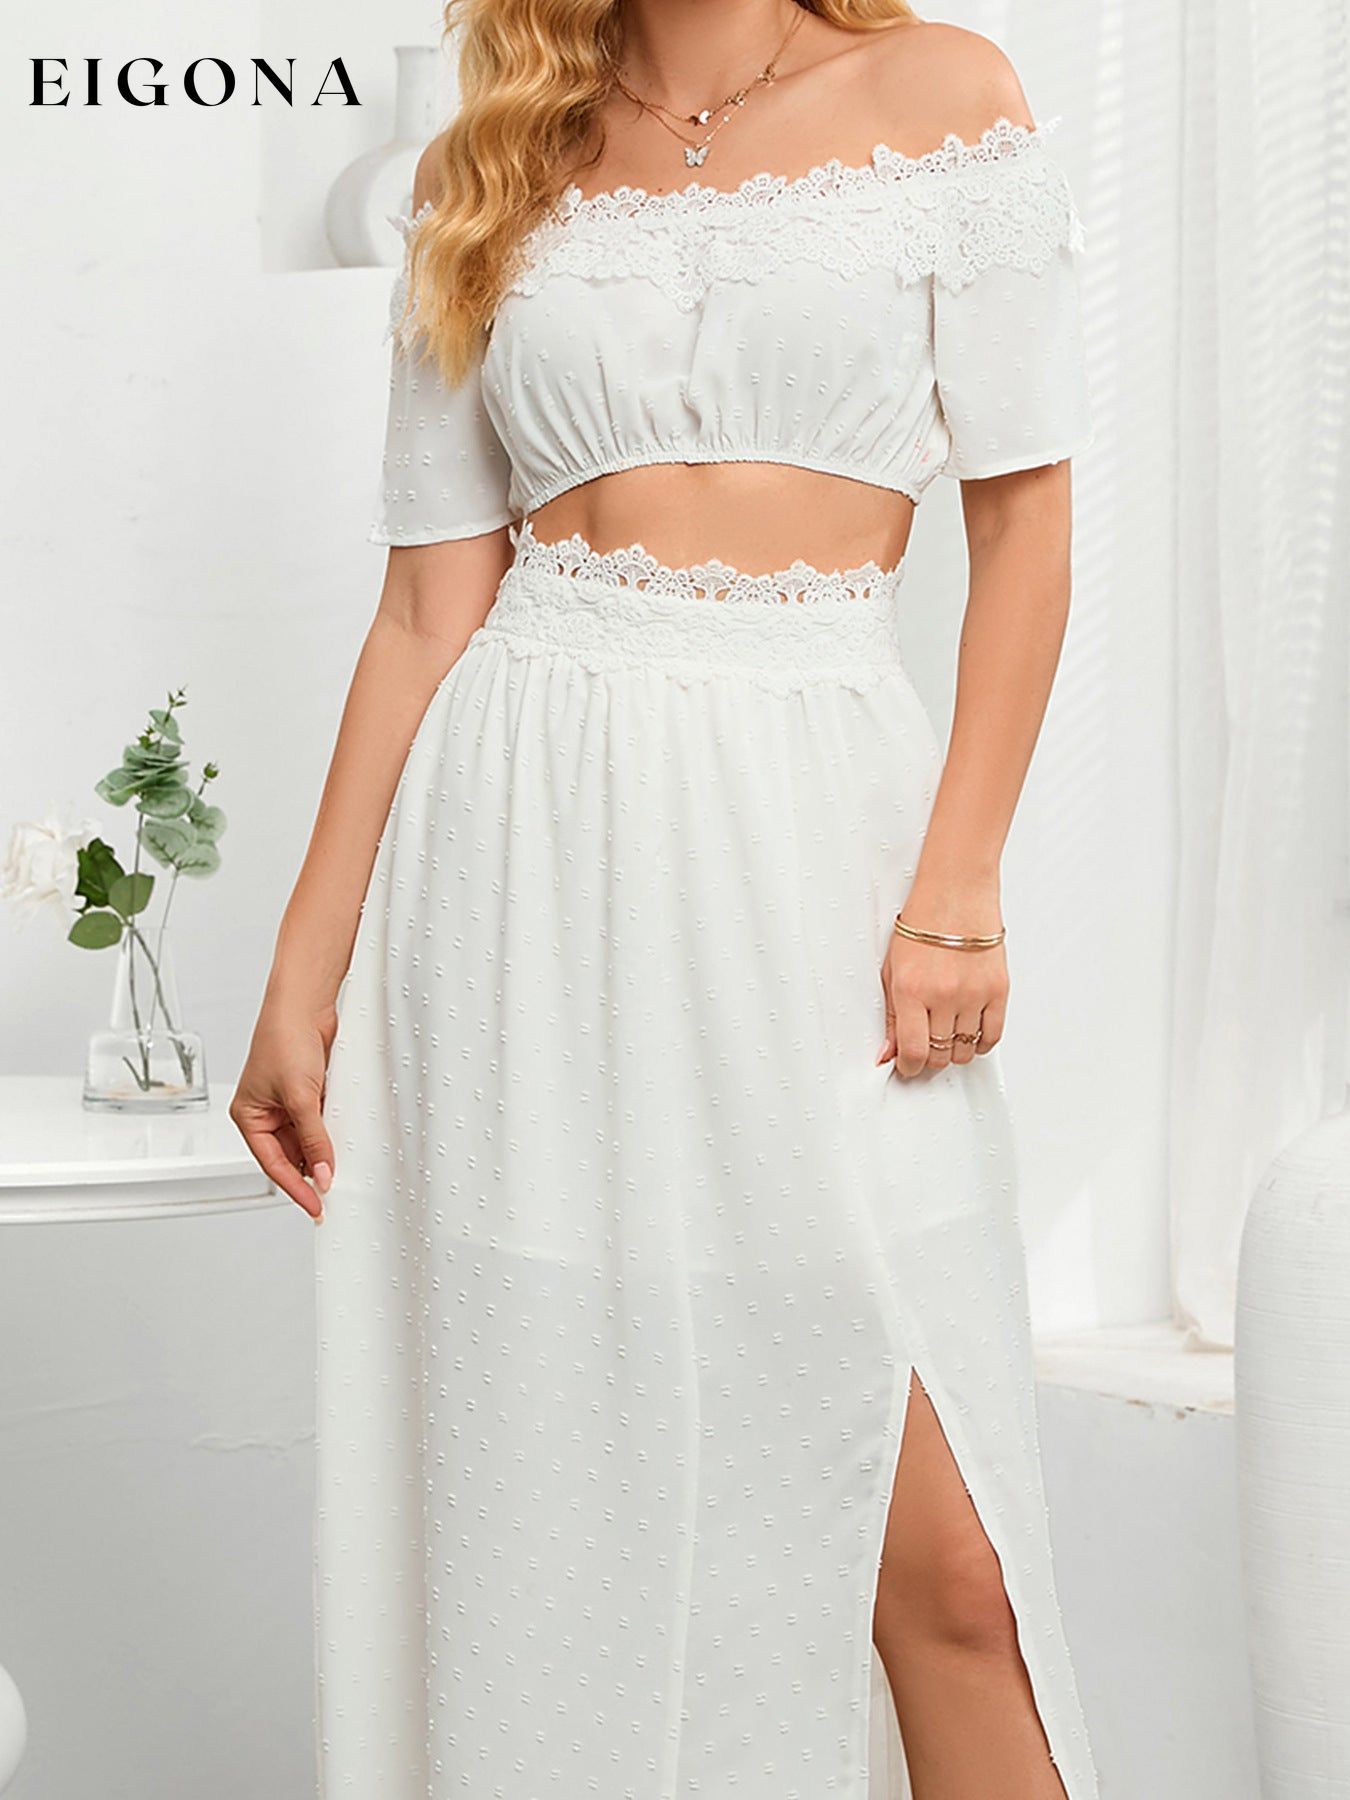 Swiss Dot Lace Trim Cropped Top and Slit Skirt Set CATHSNNA clothes crop top crop tops croptop Ship From Overseas Shipping Delay 09/29/2023 - 10/03/2023 skirt skirts